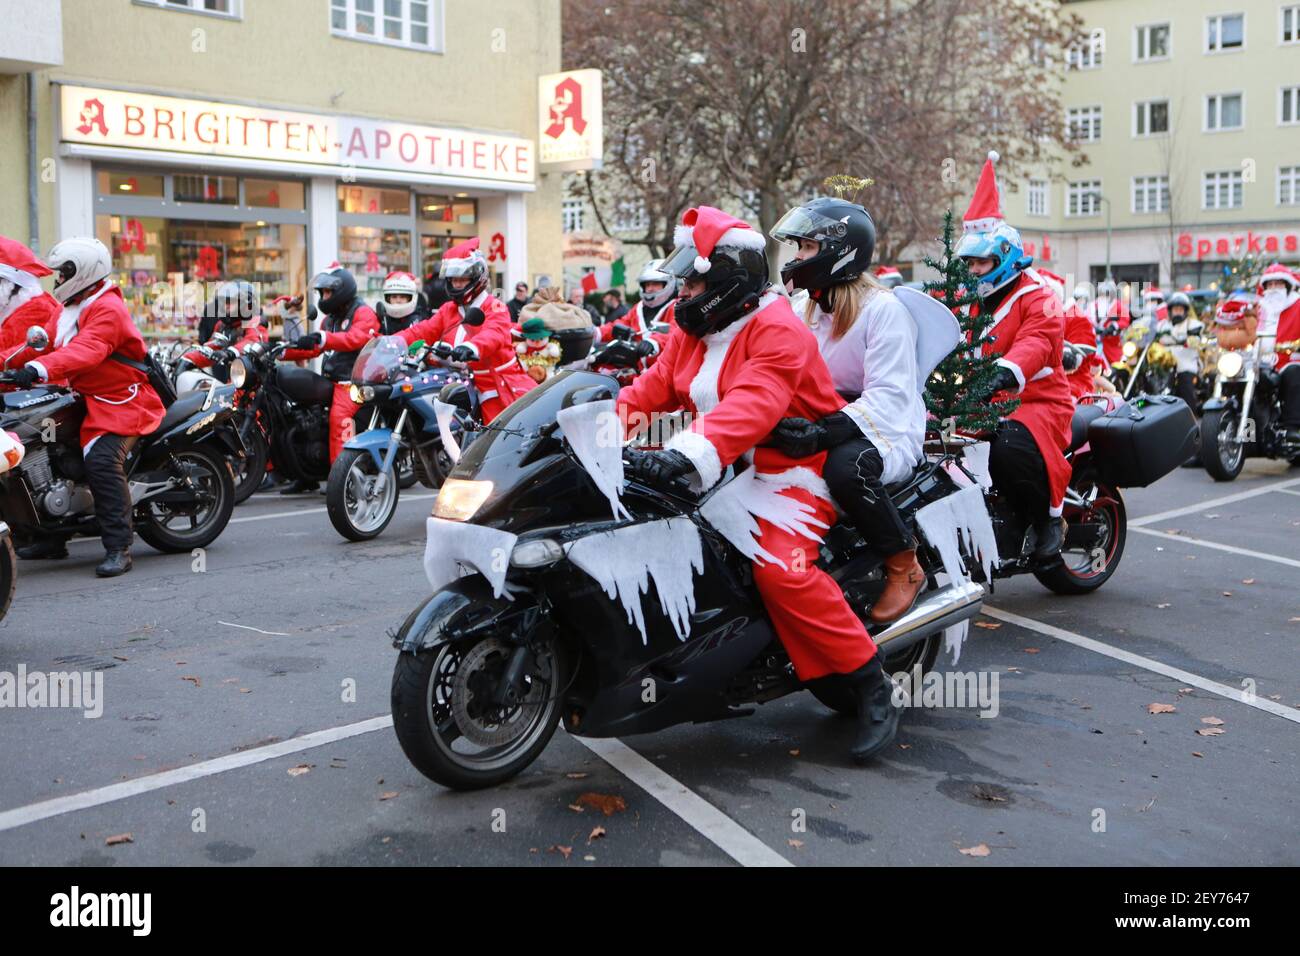 DECEMBER 13, 2014 - Berlin, Germany - Decorated motorcycles and bikers dressed as Santa Claus roam around Berlin to give gifts to the needy people; this is called the 'Christmas Berlin Bike Tour' (Photo by Simone Kuhlmey / Pacific Press/Sipa USA) Stock Photo